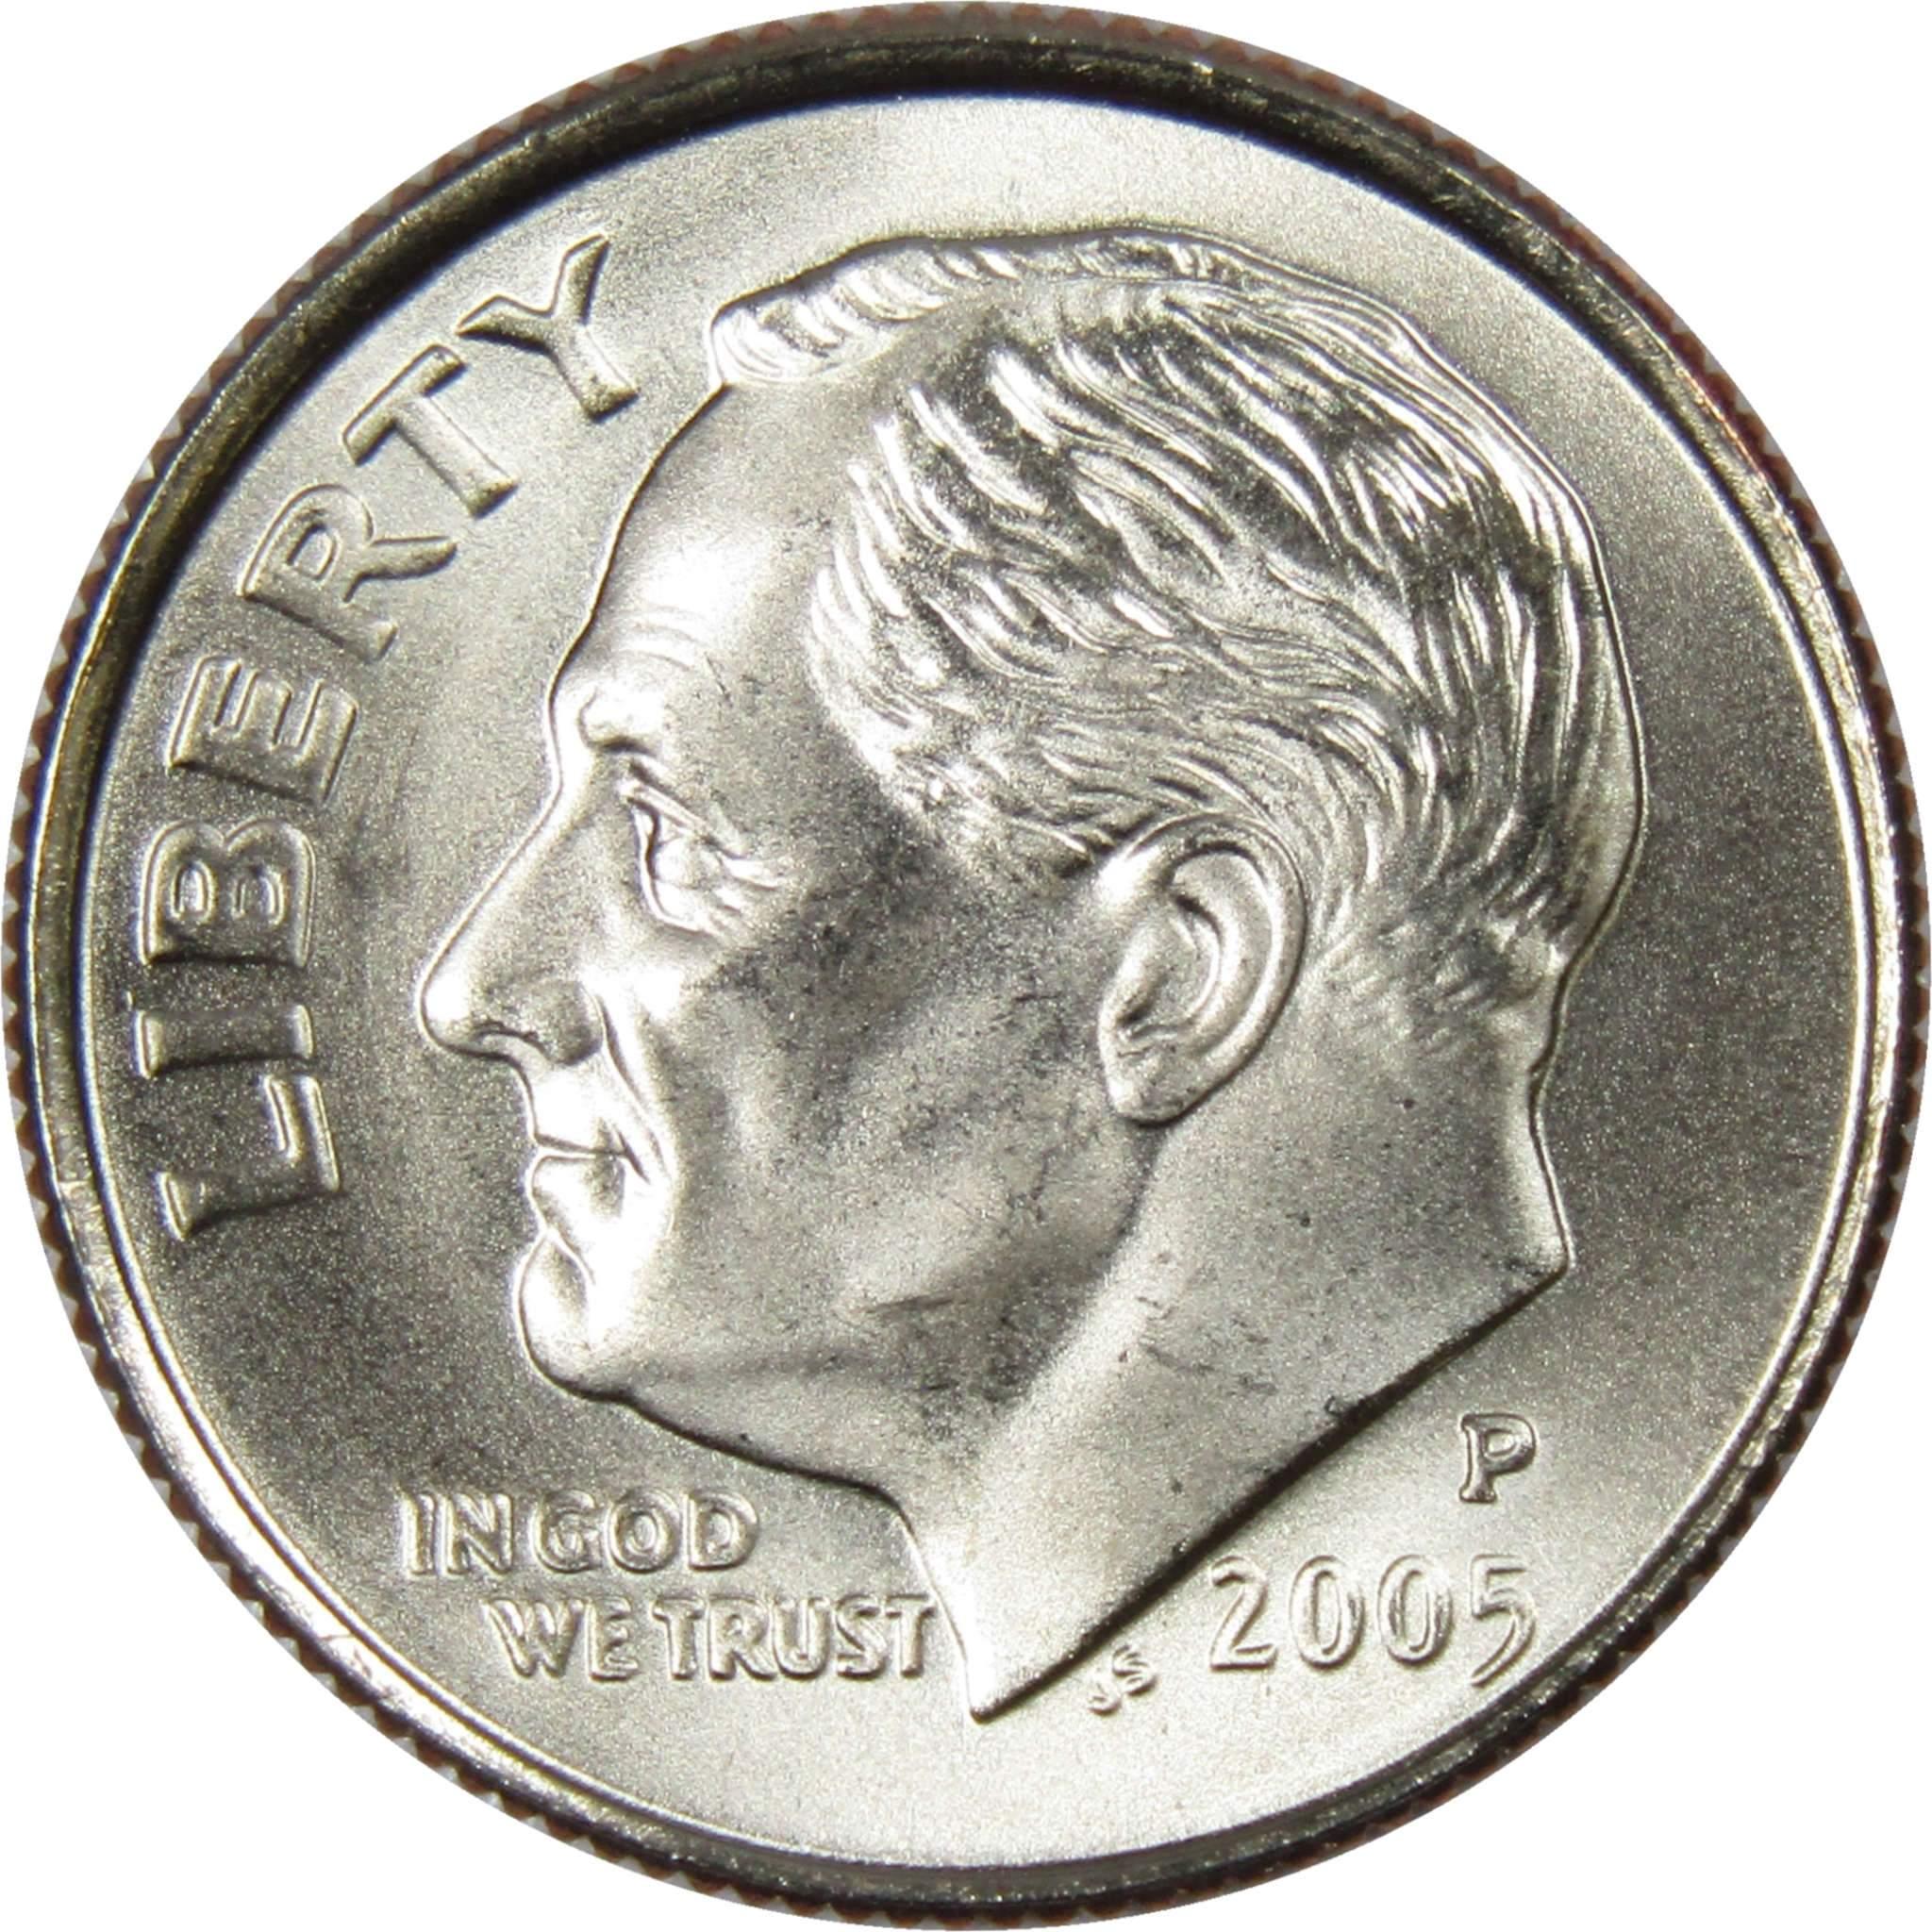 2005 P Roosevelt Dime BU Uncirculated Mint State 10c US Coin Collectible